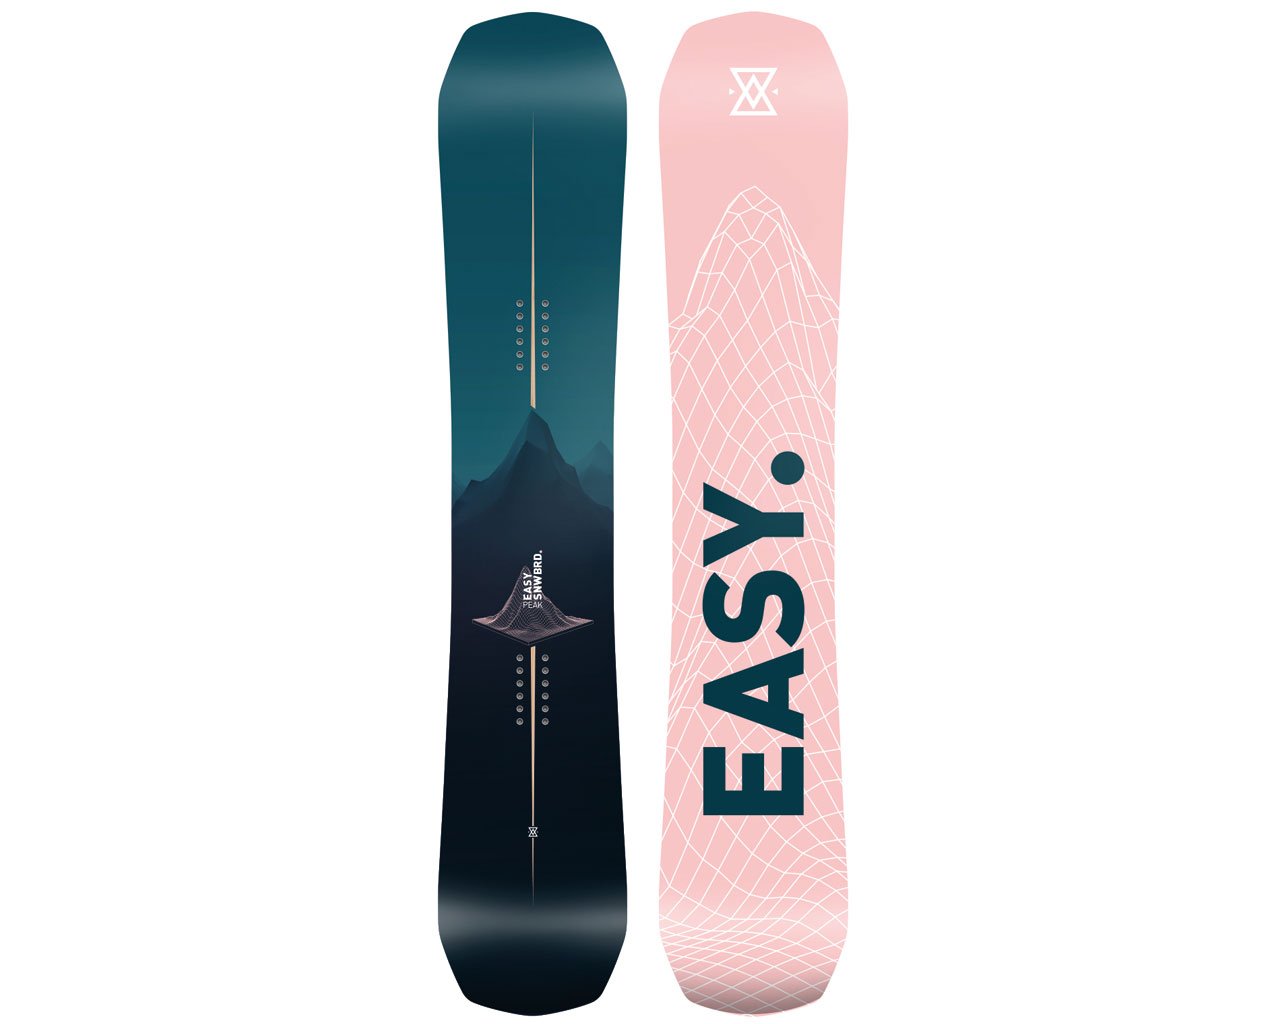 Easy FW20/21 Snowboard Preview